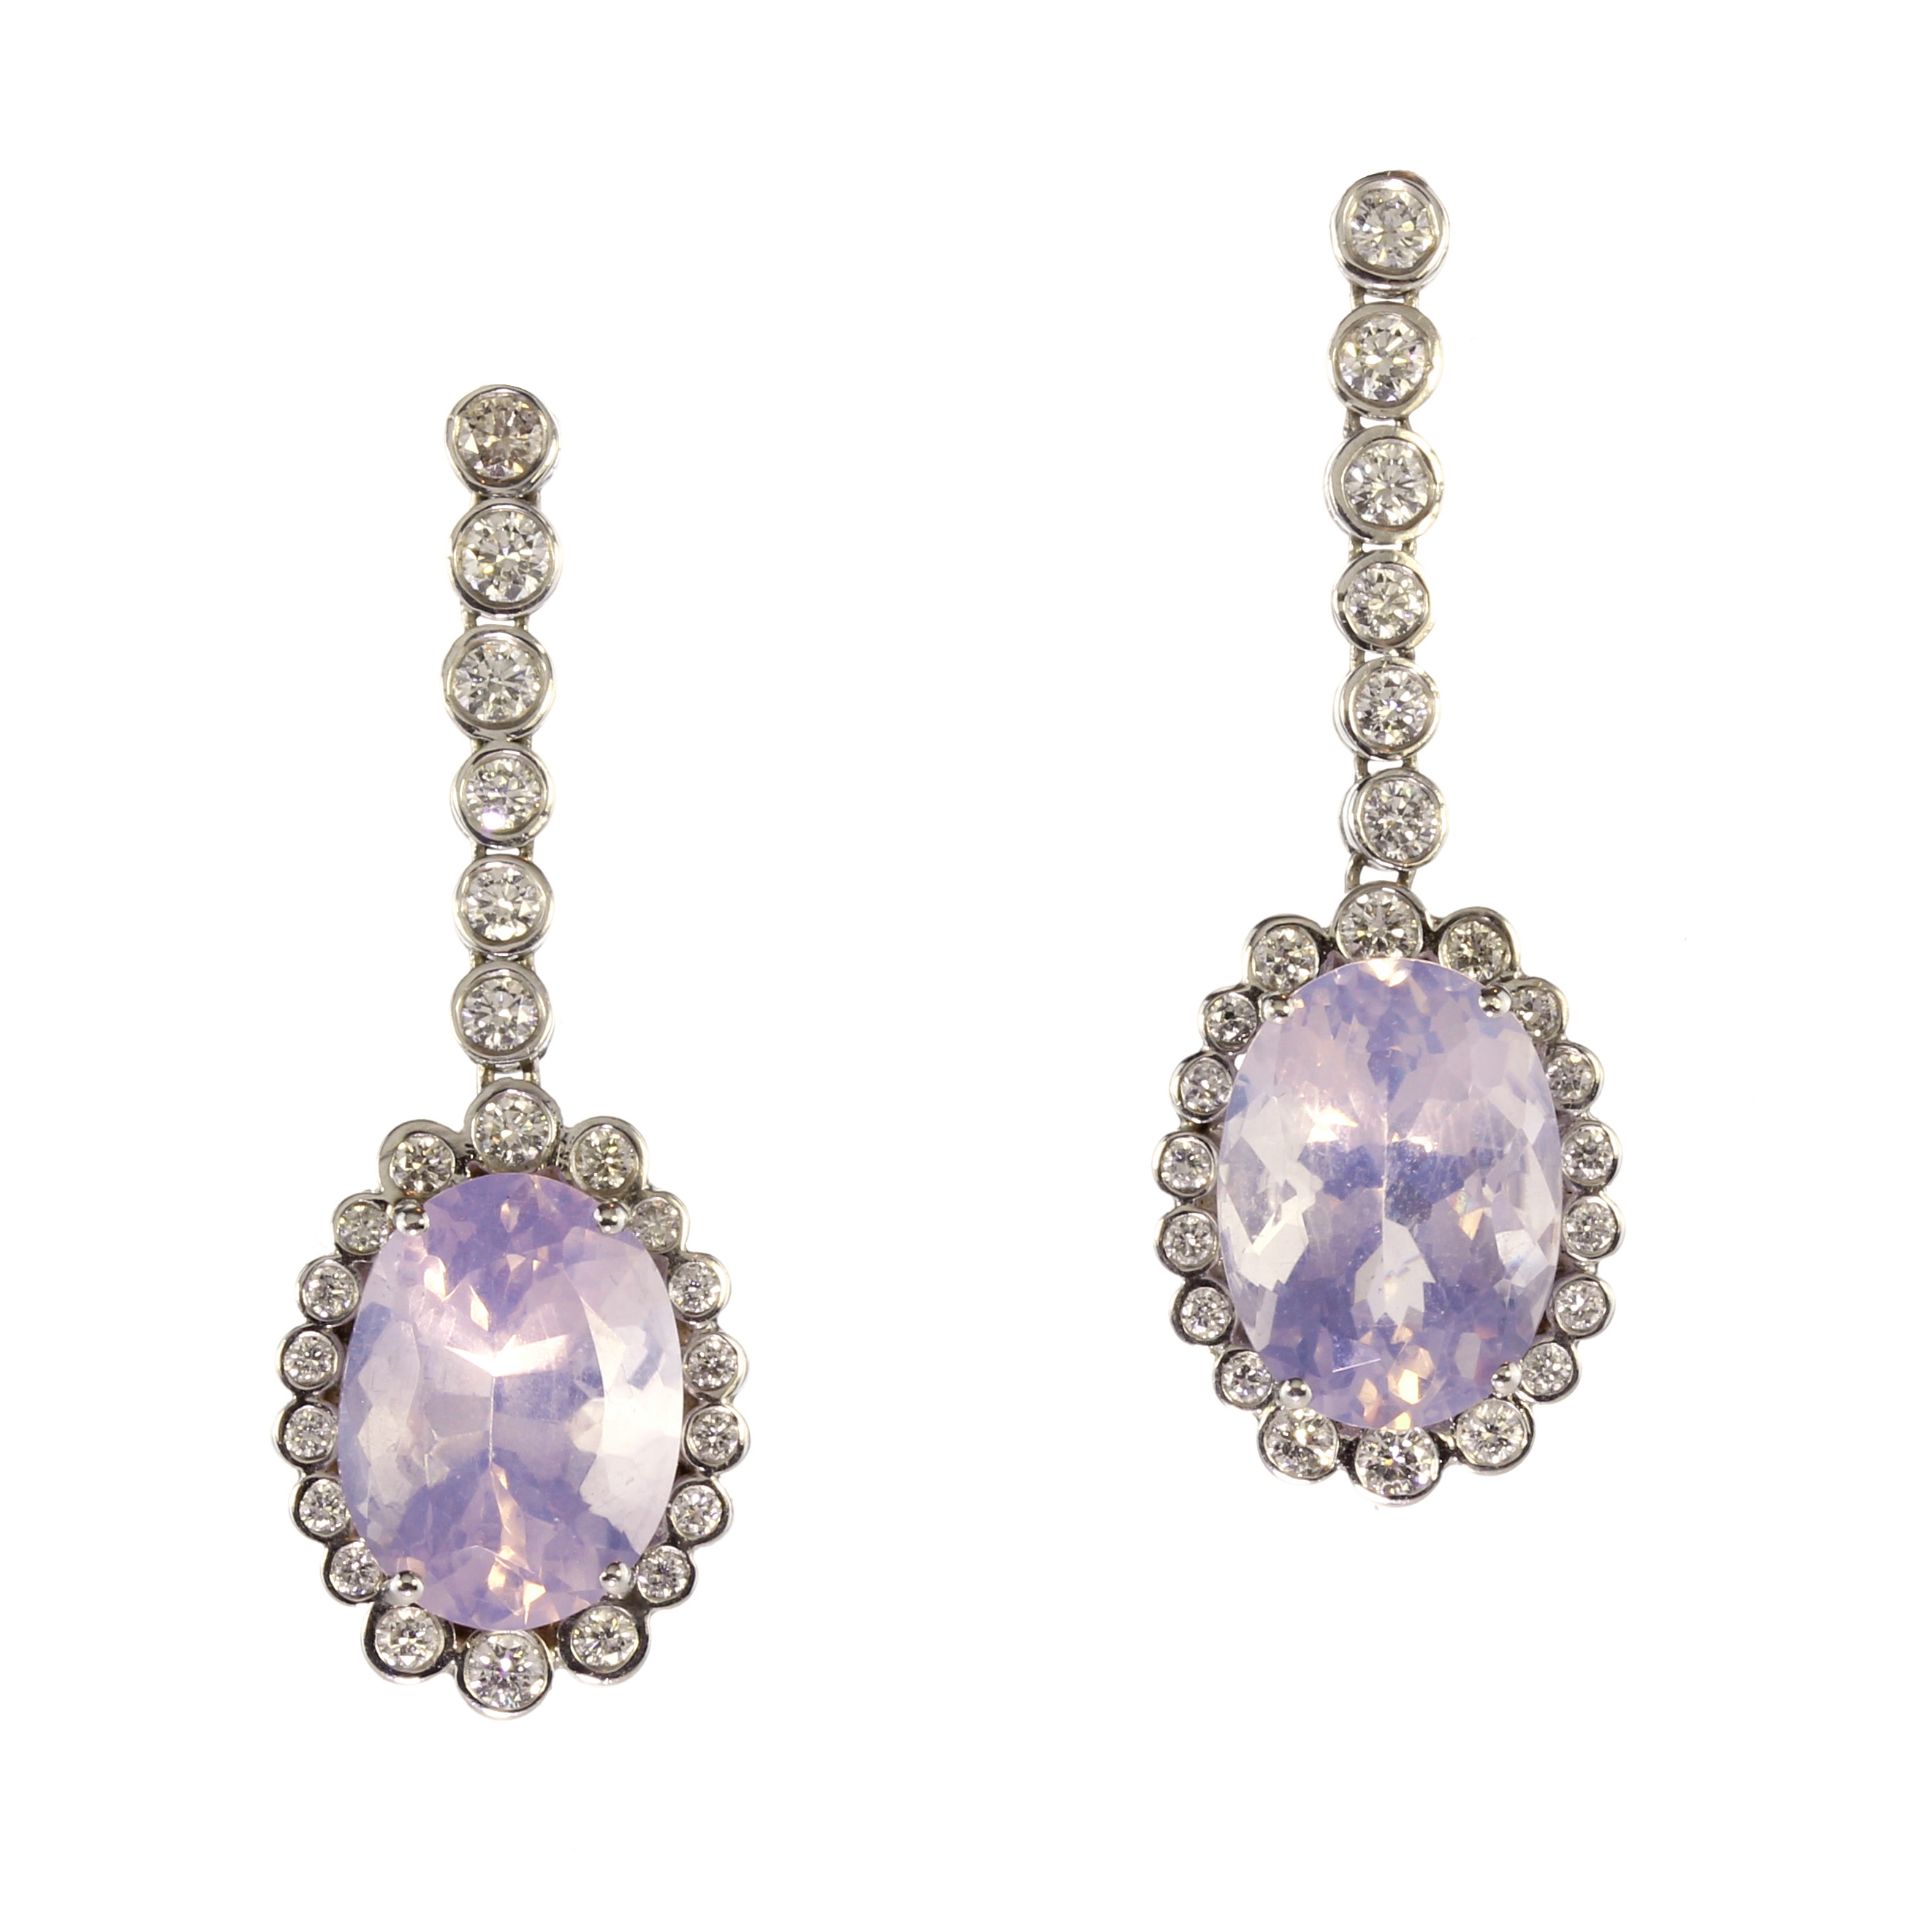 A pair of lavender amethyst and diamond earrings in 18ct white gold each set with a central oval cut